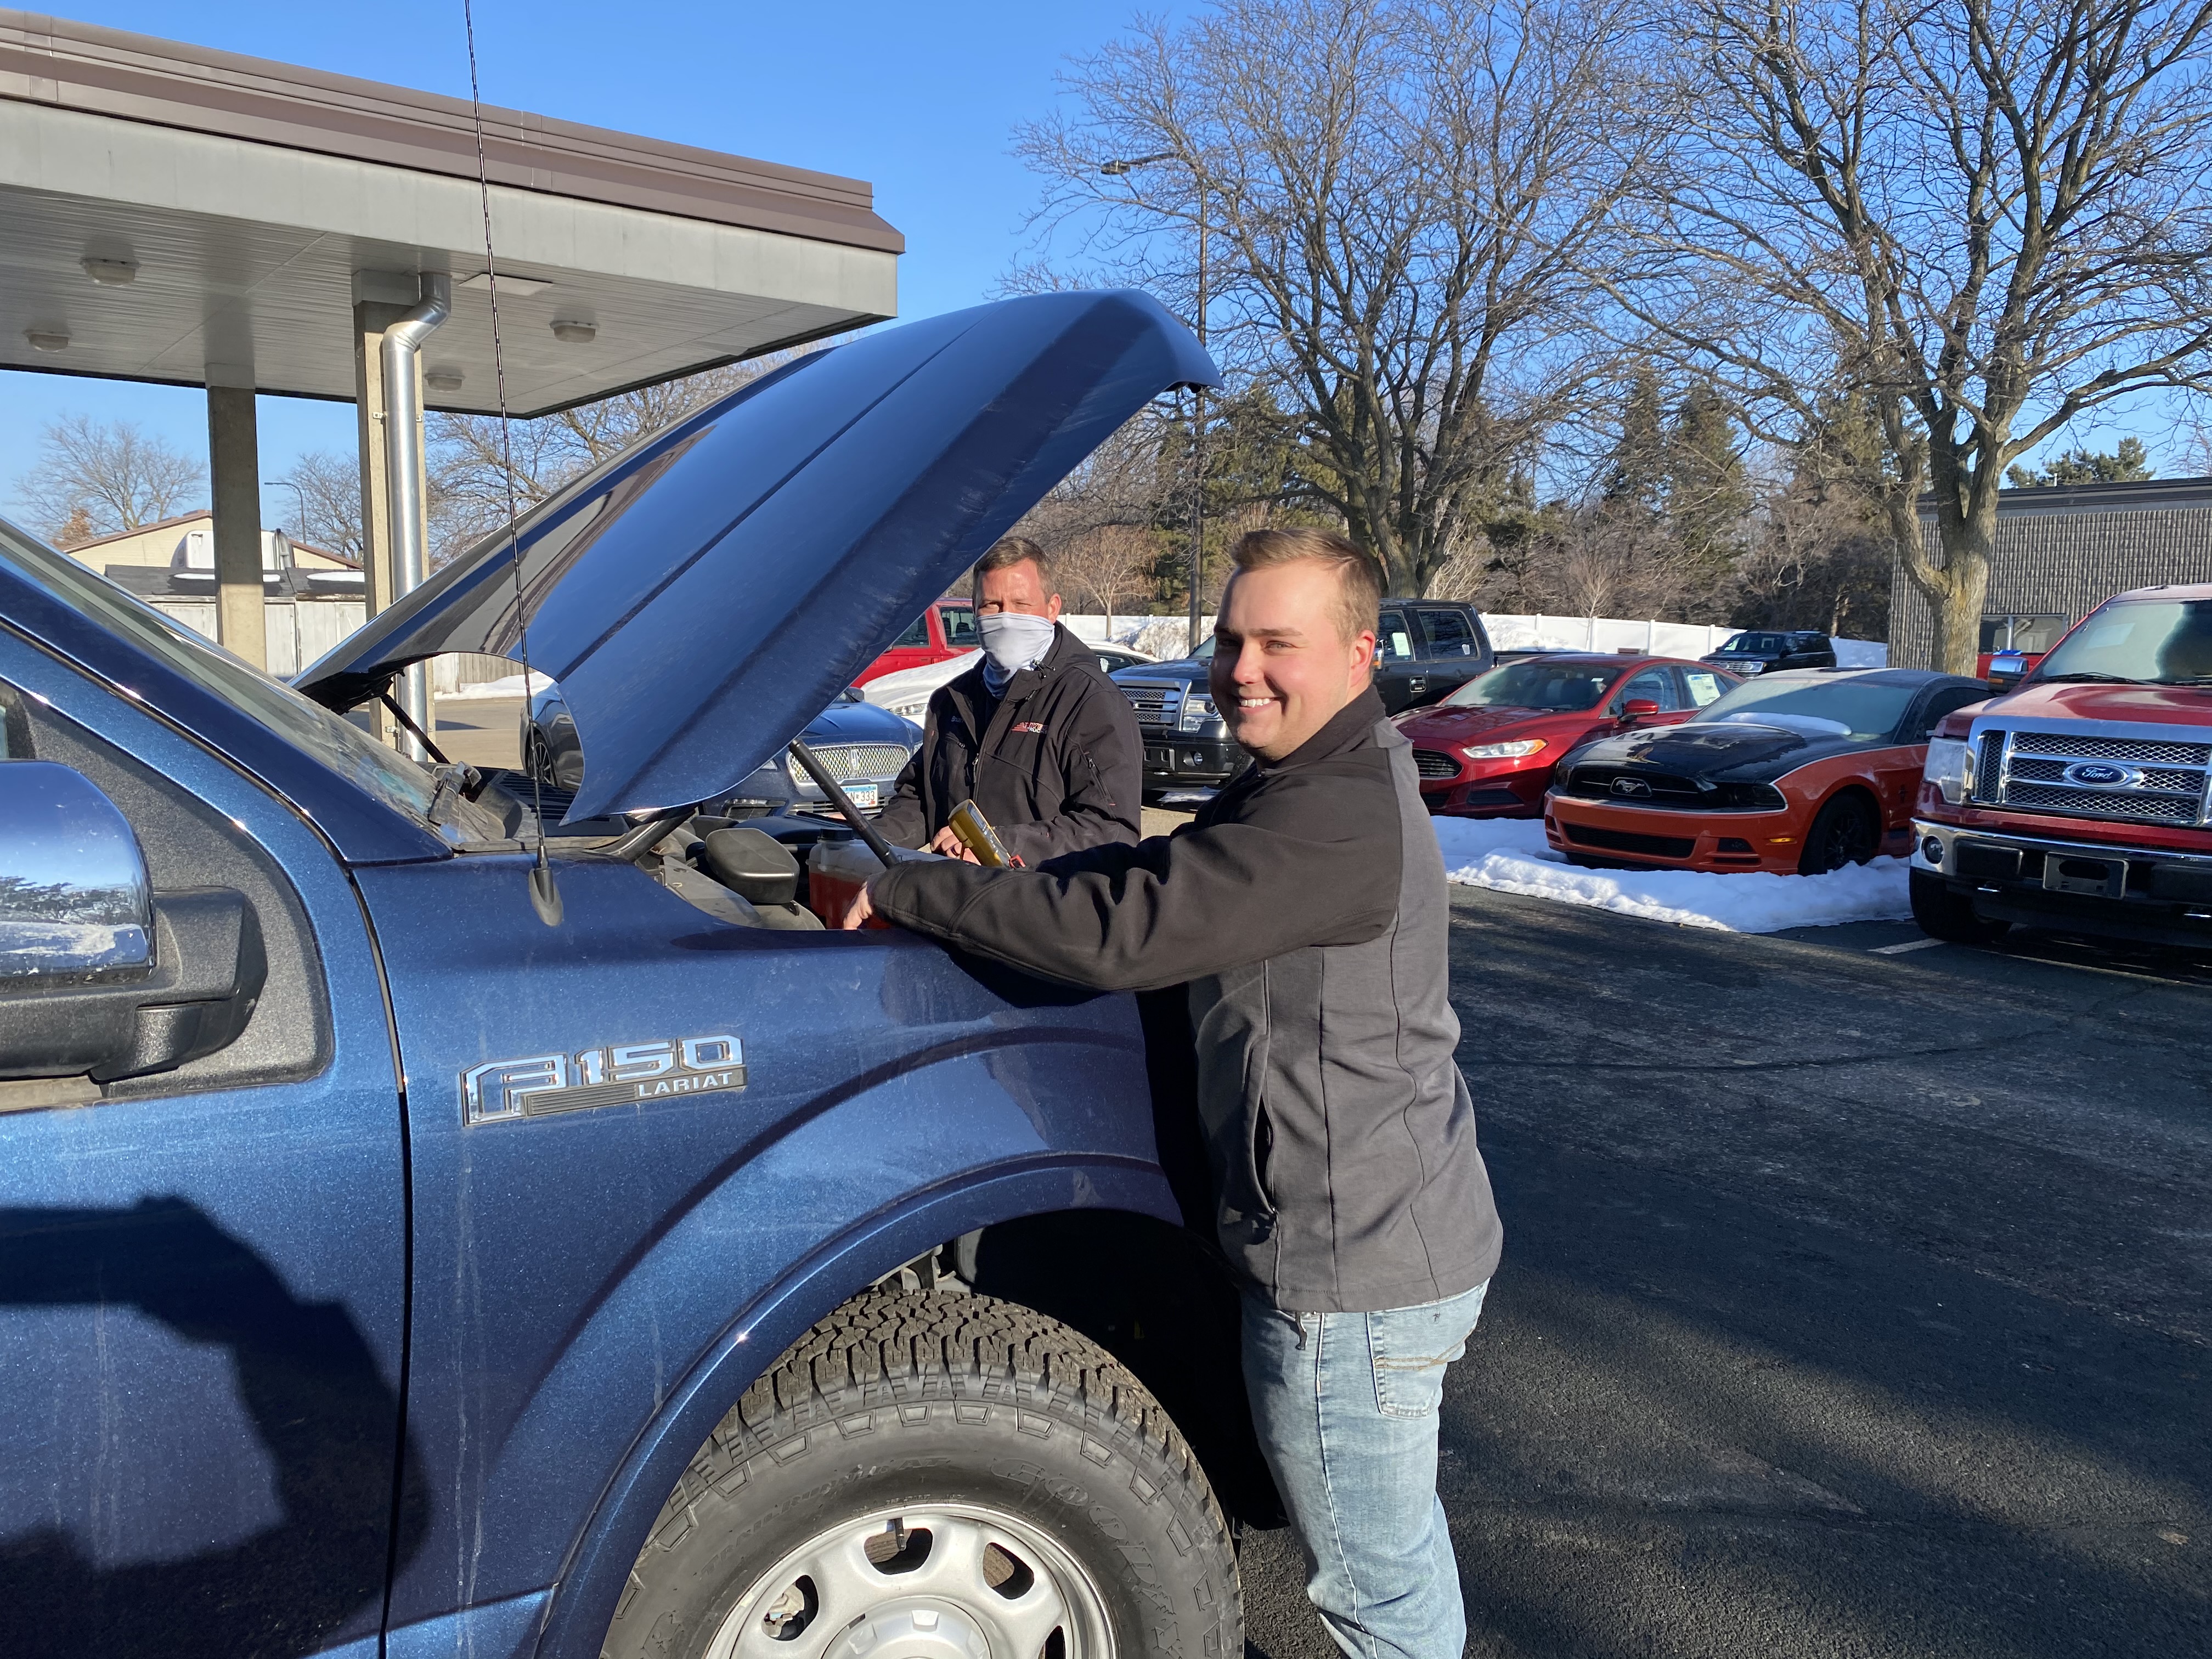 Tyler Carmody and man work on Ford F-150 truck in parking lot